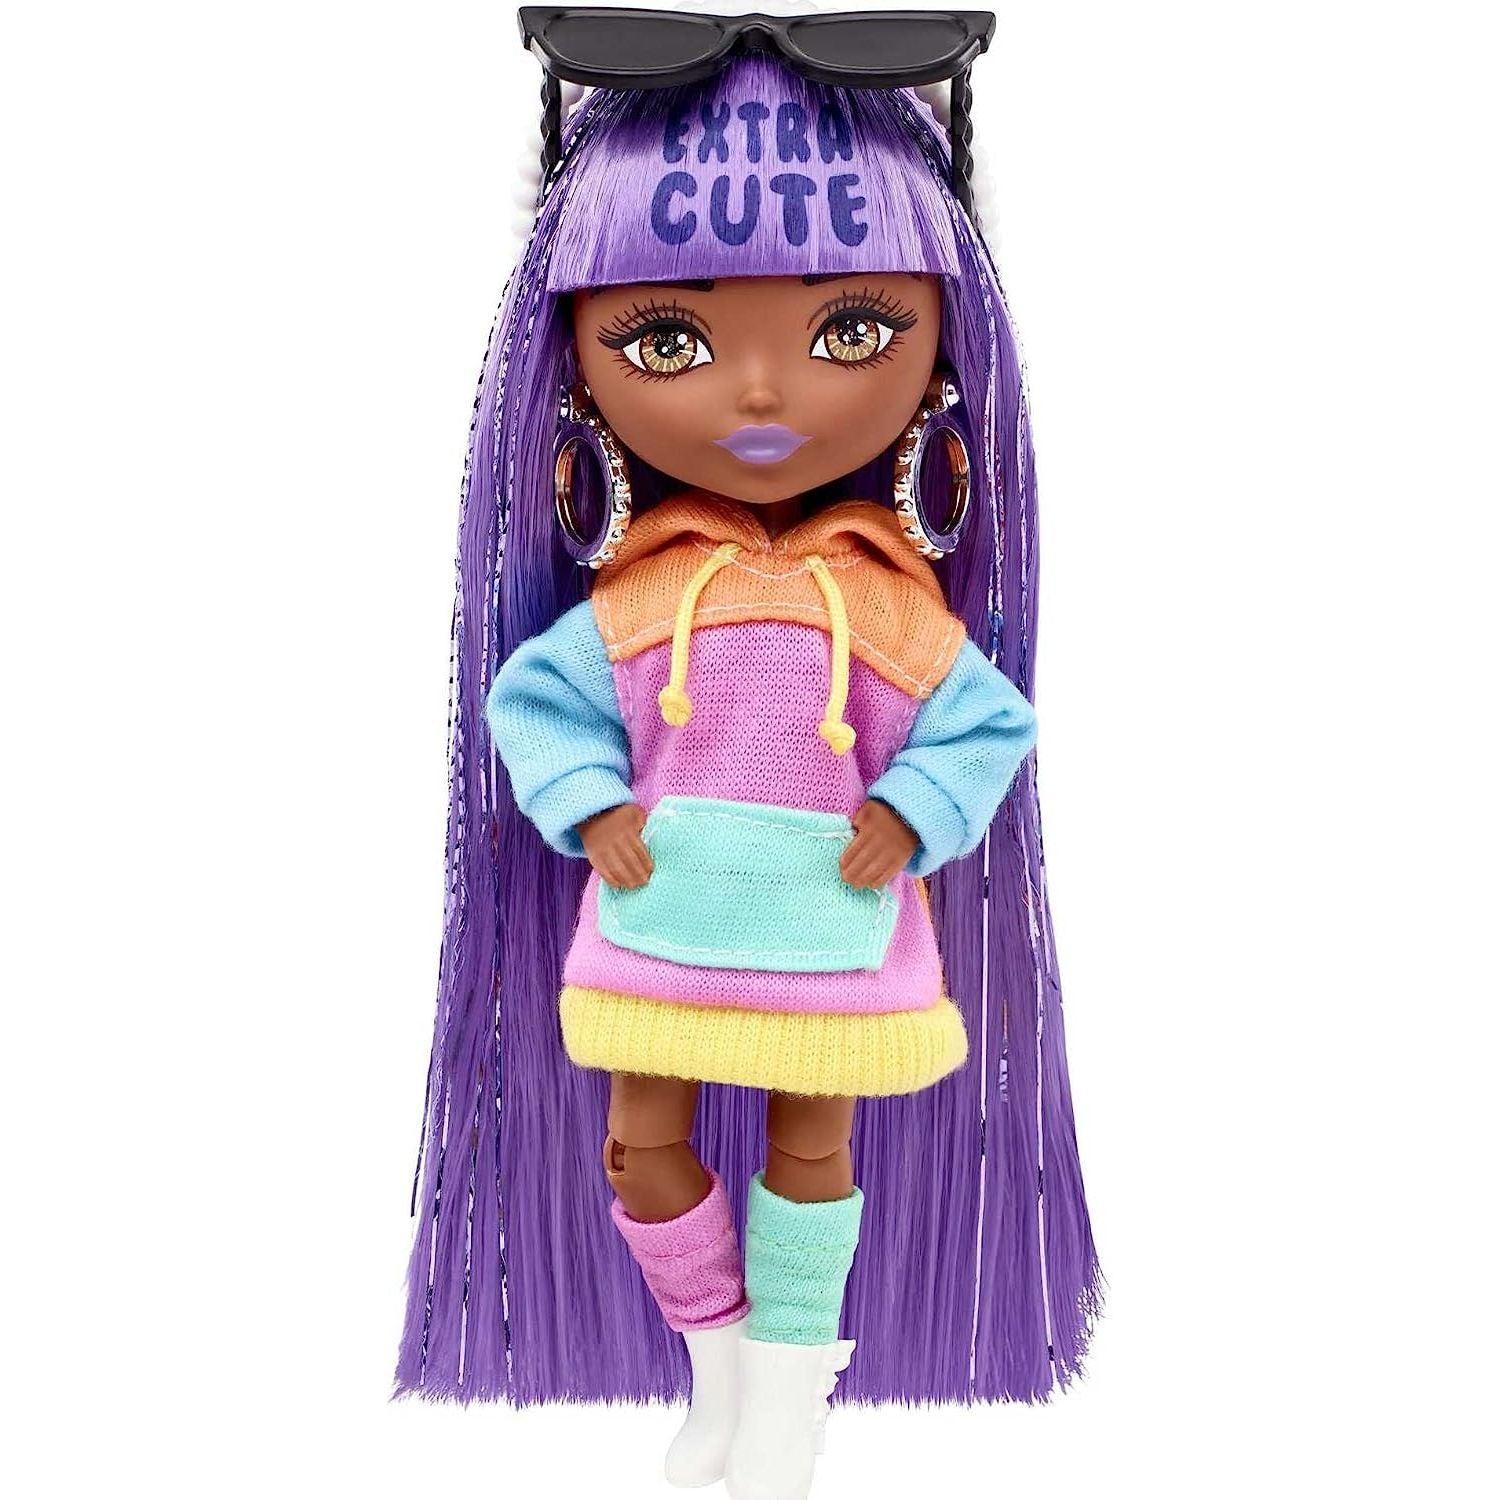 Barbie Extra Minis Doll & Accessories with Purple & Silver Hair, Toy Pieces Include Color-Block Hoodie Dress & Boots - BumbleToys - 5-7 Years, Barbie, Barbie Extra, Dolls, Fashion Dolls & Accessories, Girls, Miniature Dolls & Accessories, OXE, Pre-Order